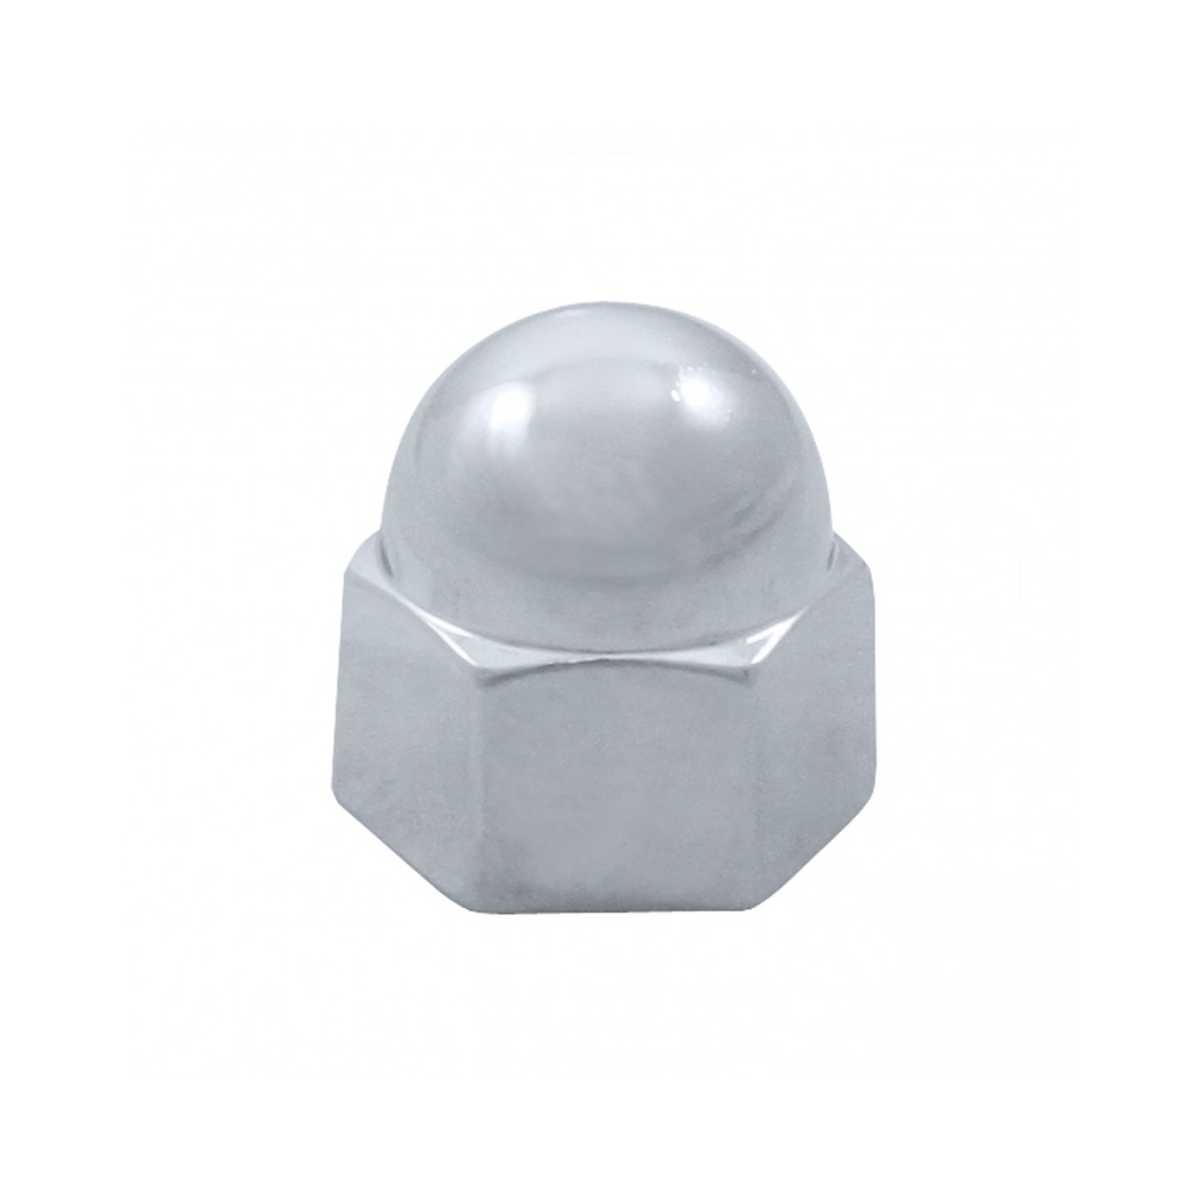 1/2 Inch x 11/16 Inch Acorn Die Cast Nut Cover - 10 Pack